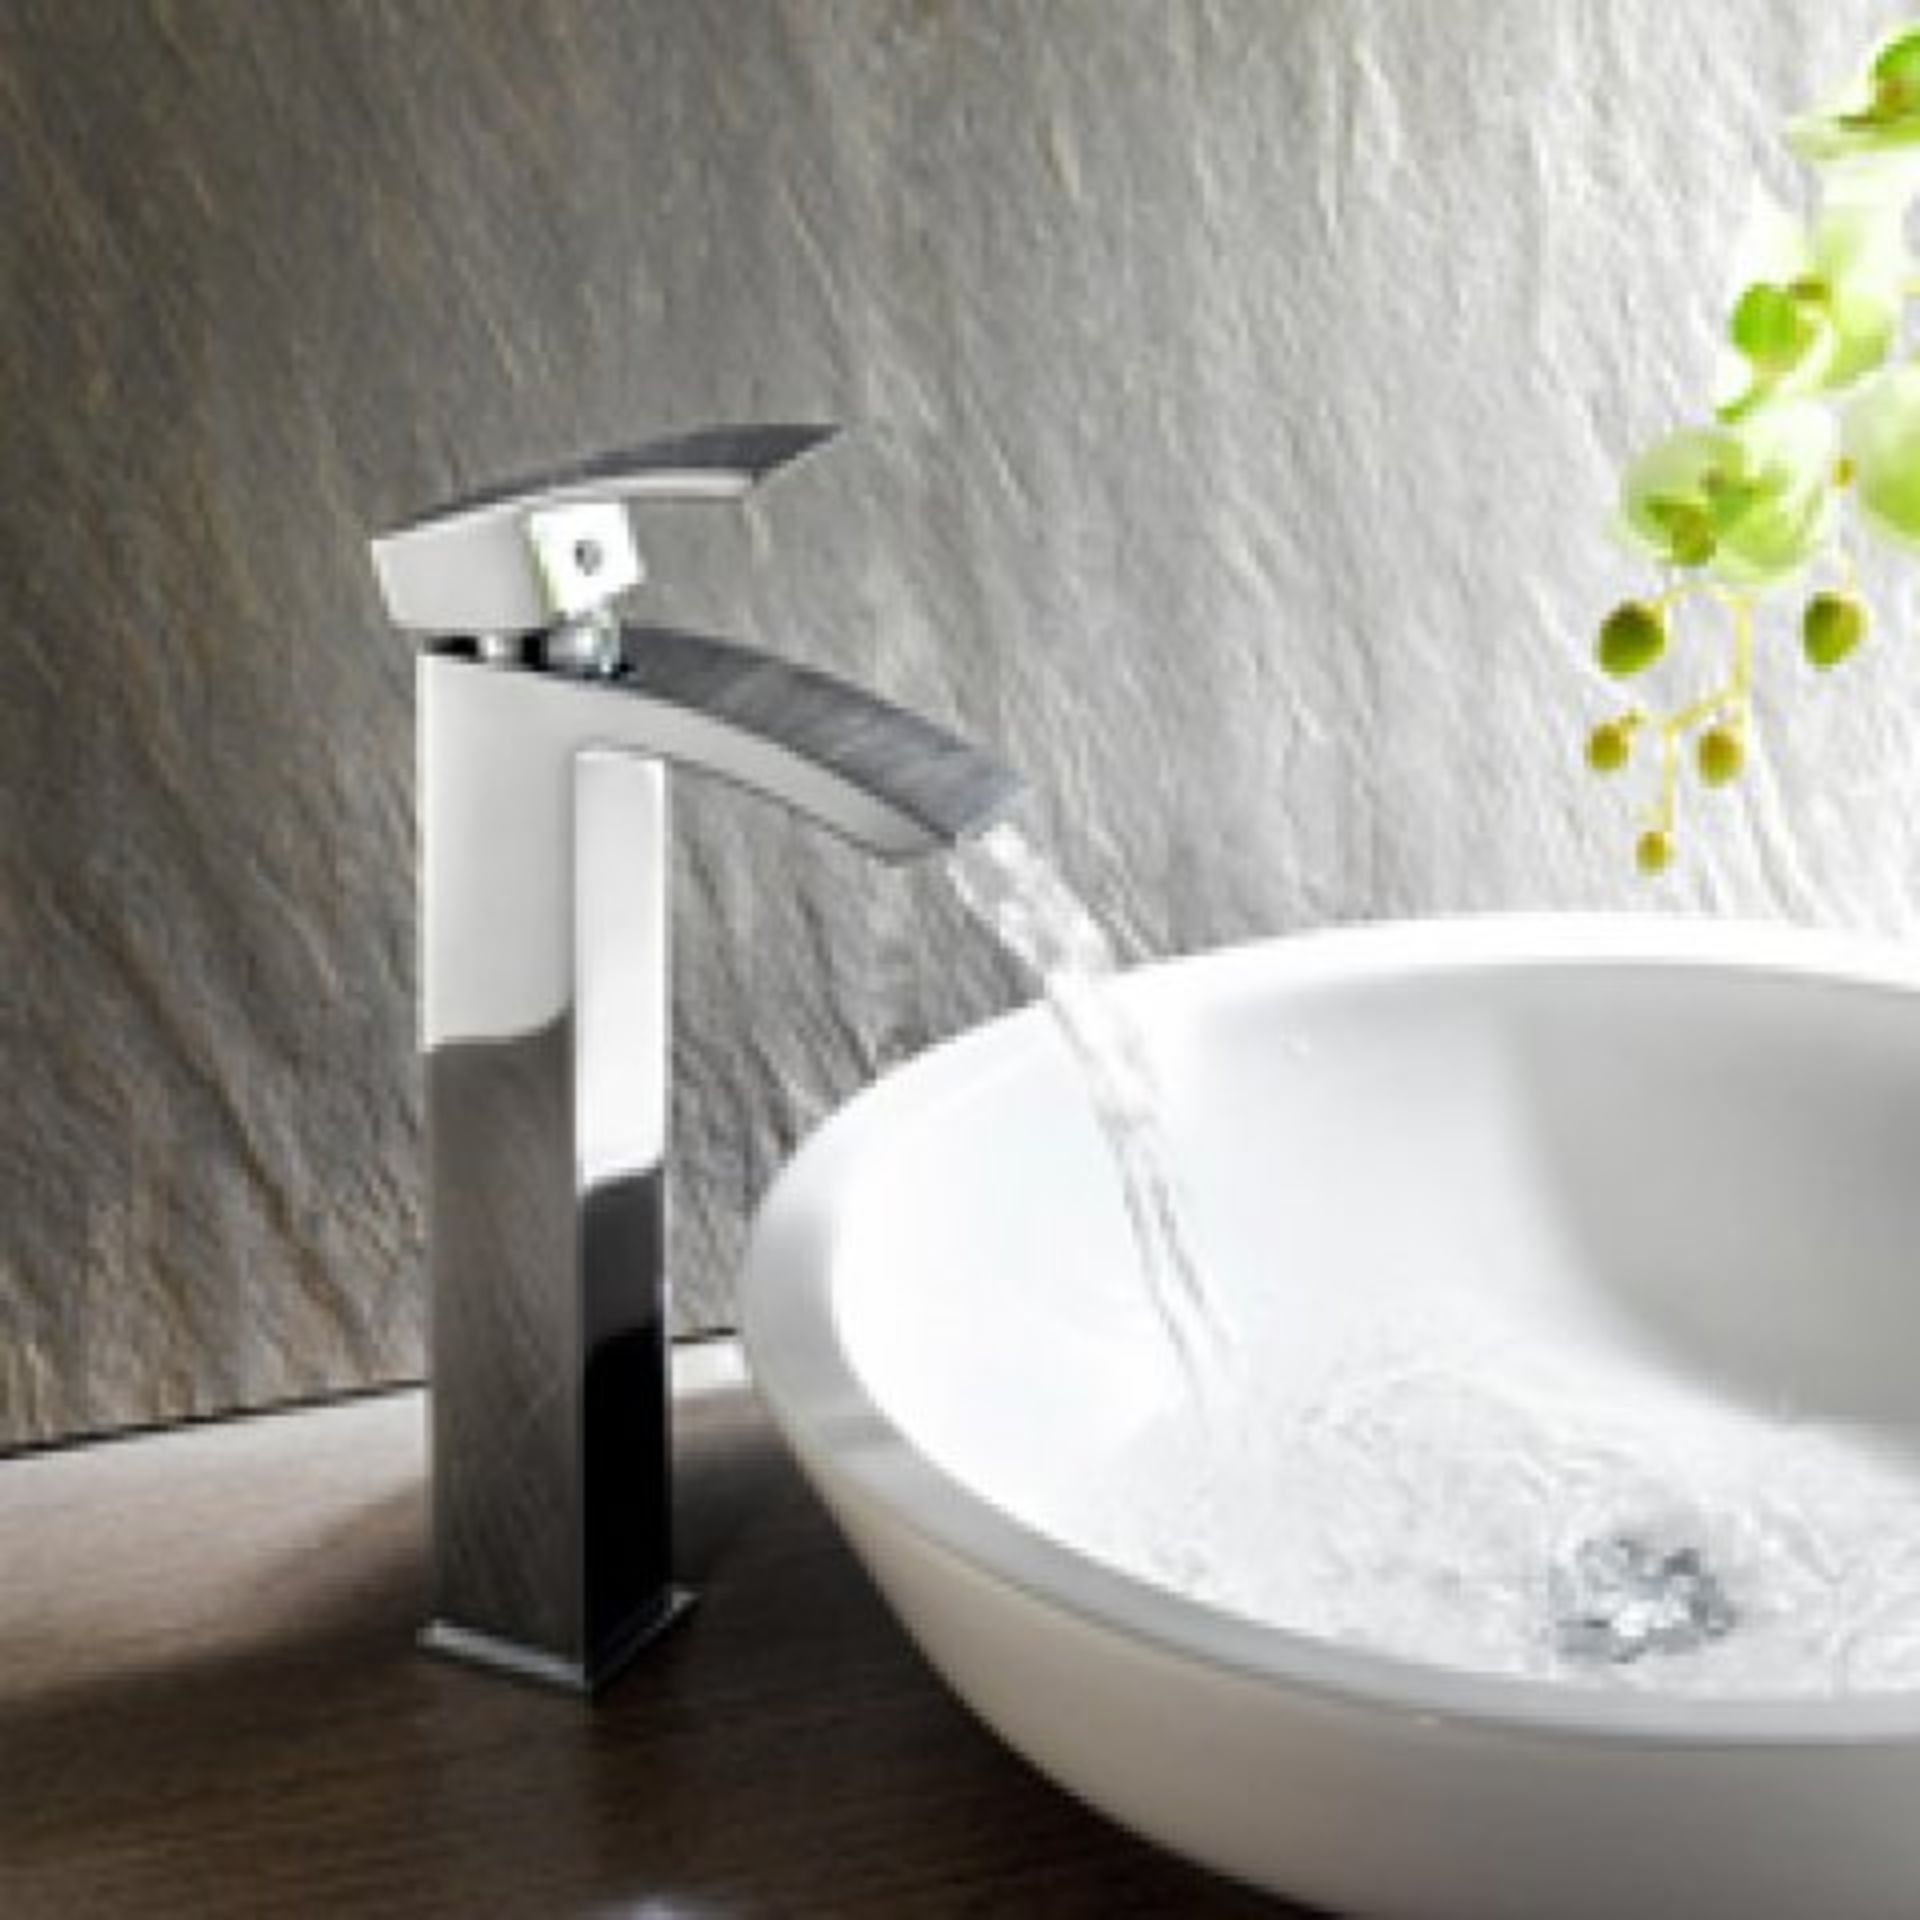 (V105) Keila Counter Top Basin Mixer Tap Countertop Elegance Our counter top tap proves to be an - Image 2 of 3